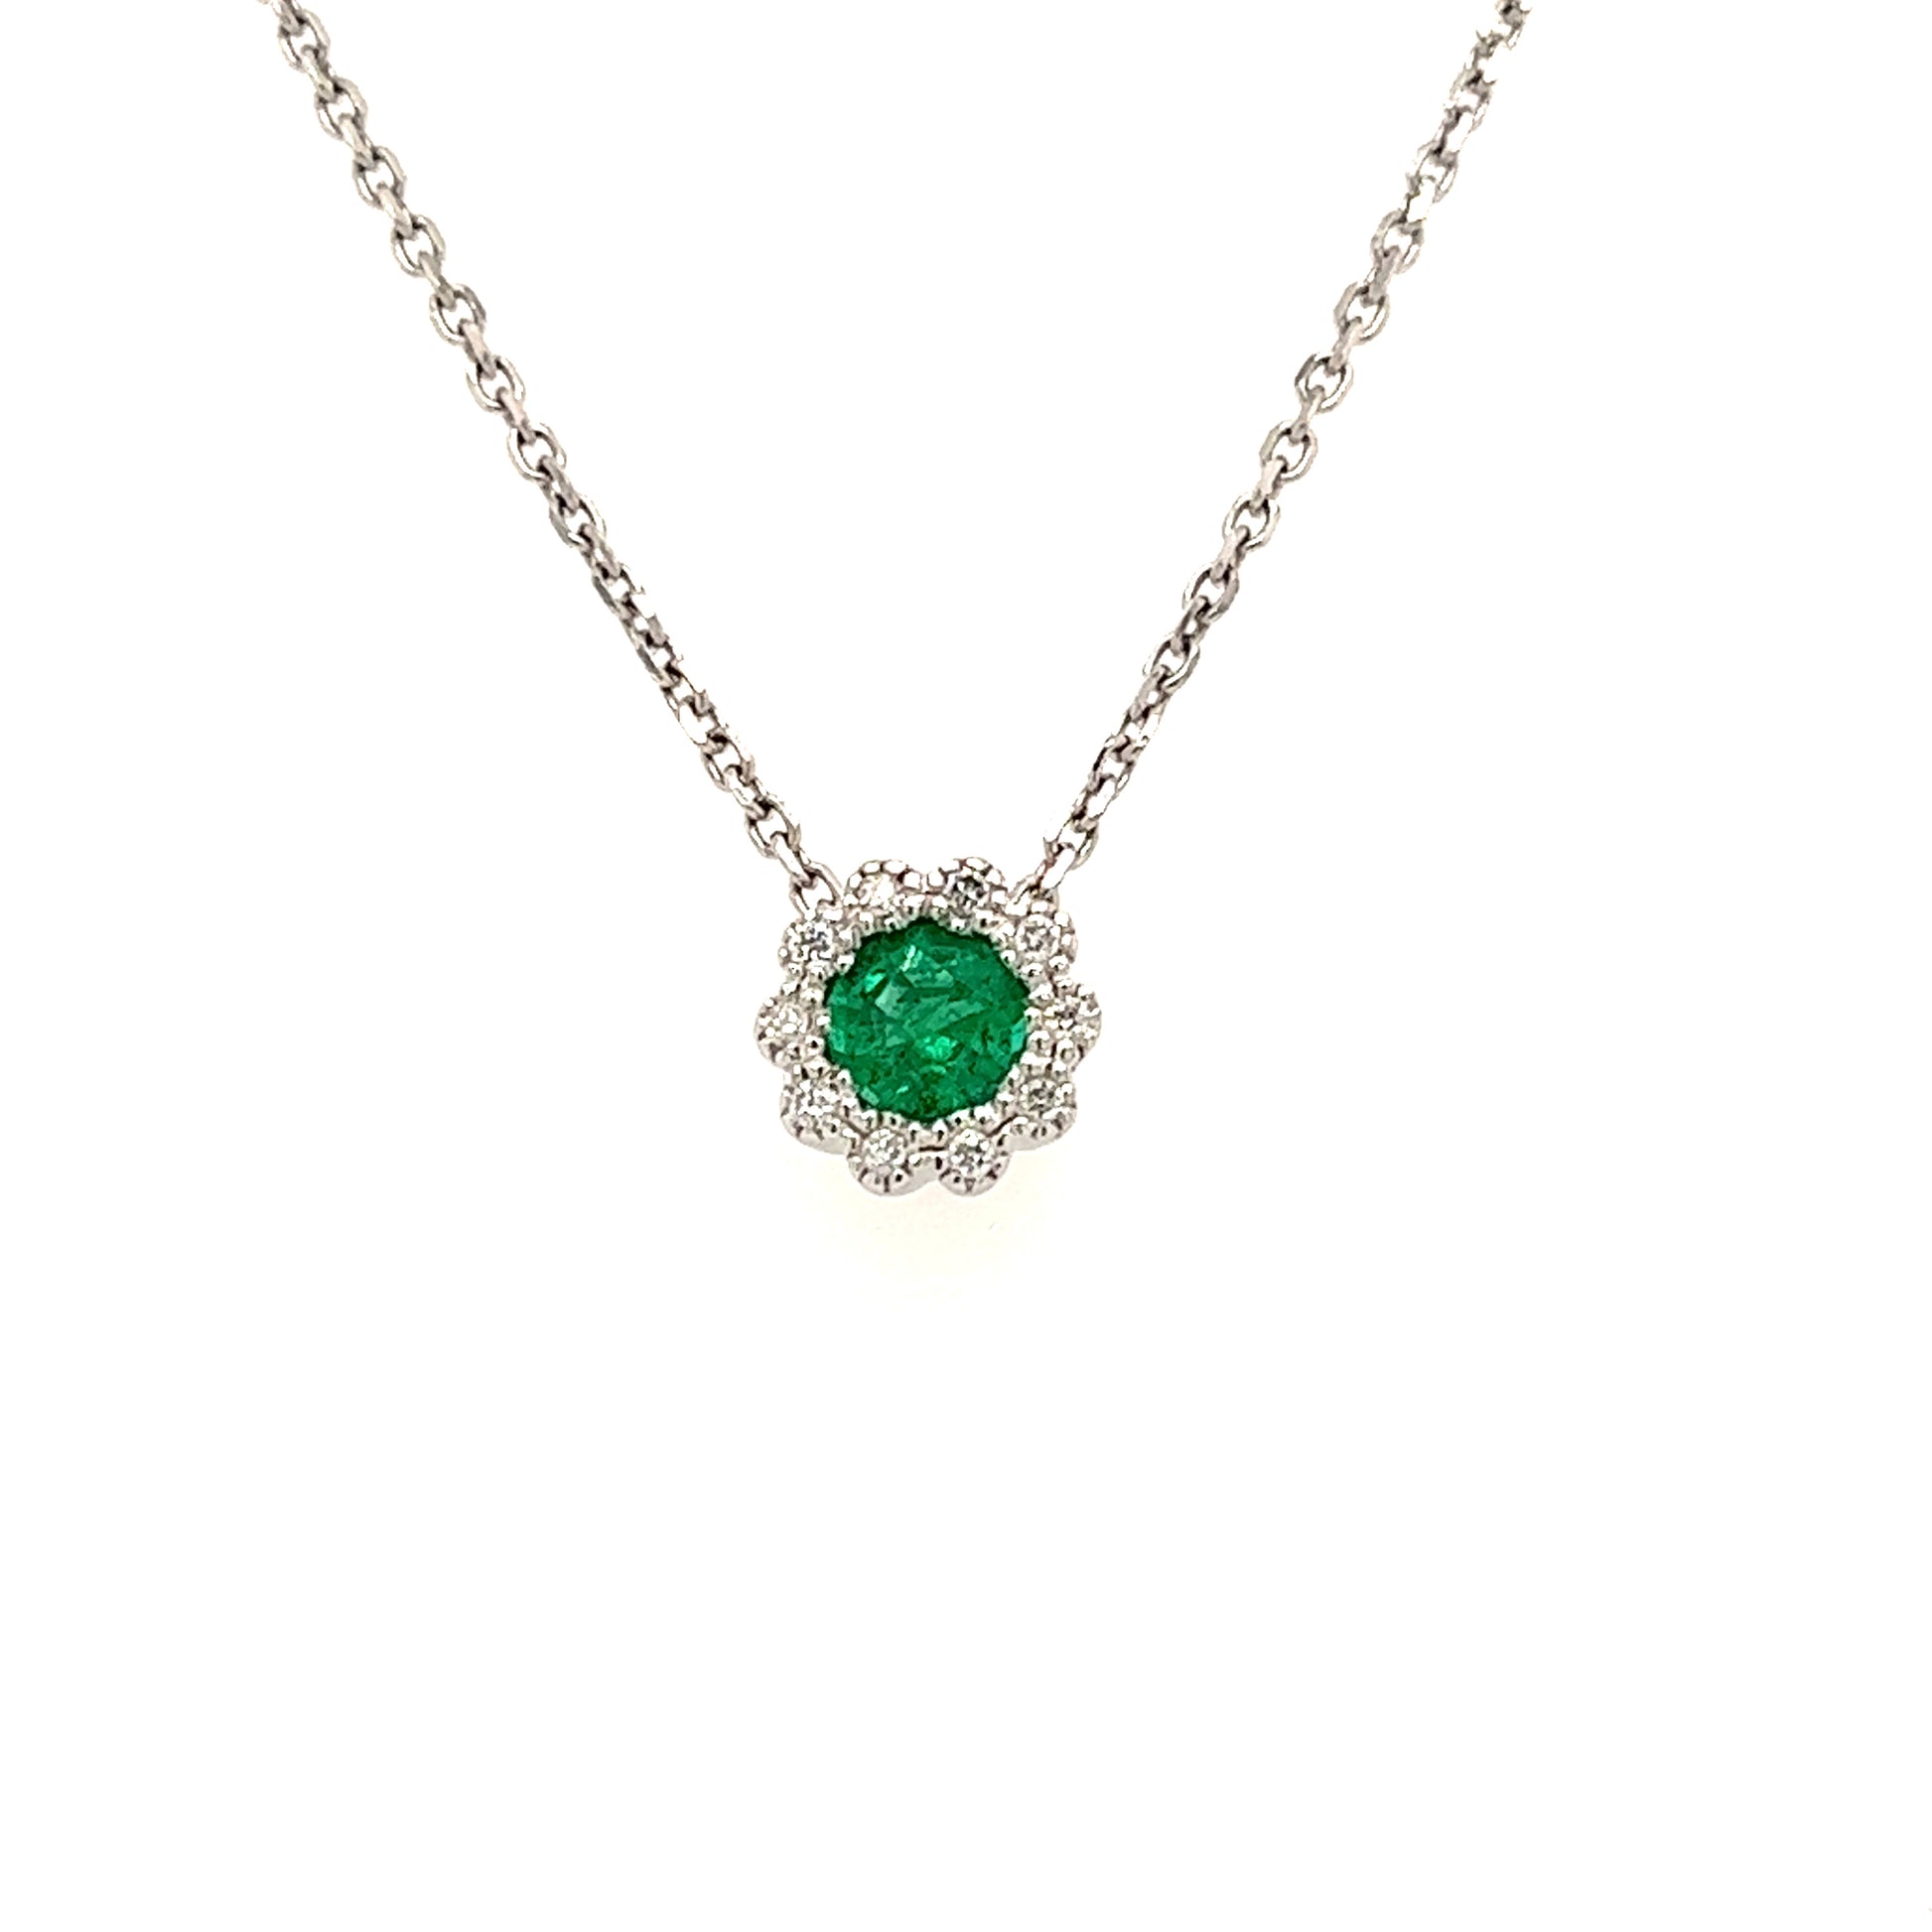 Floral Emerald Pendant with Diamond Halo in 14K White Gold Pendant and Chain Front View